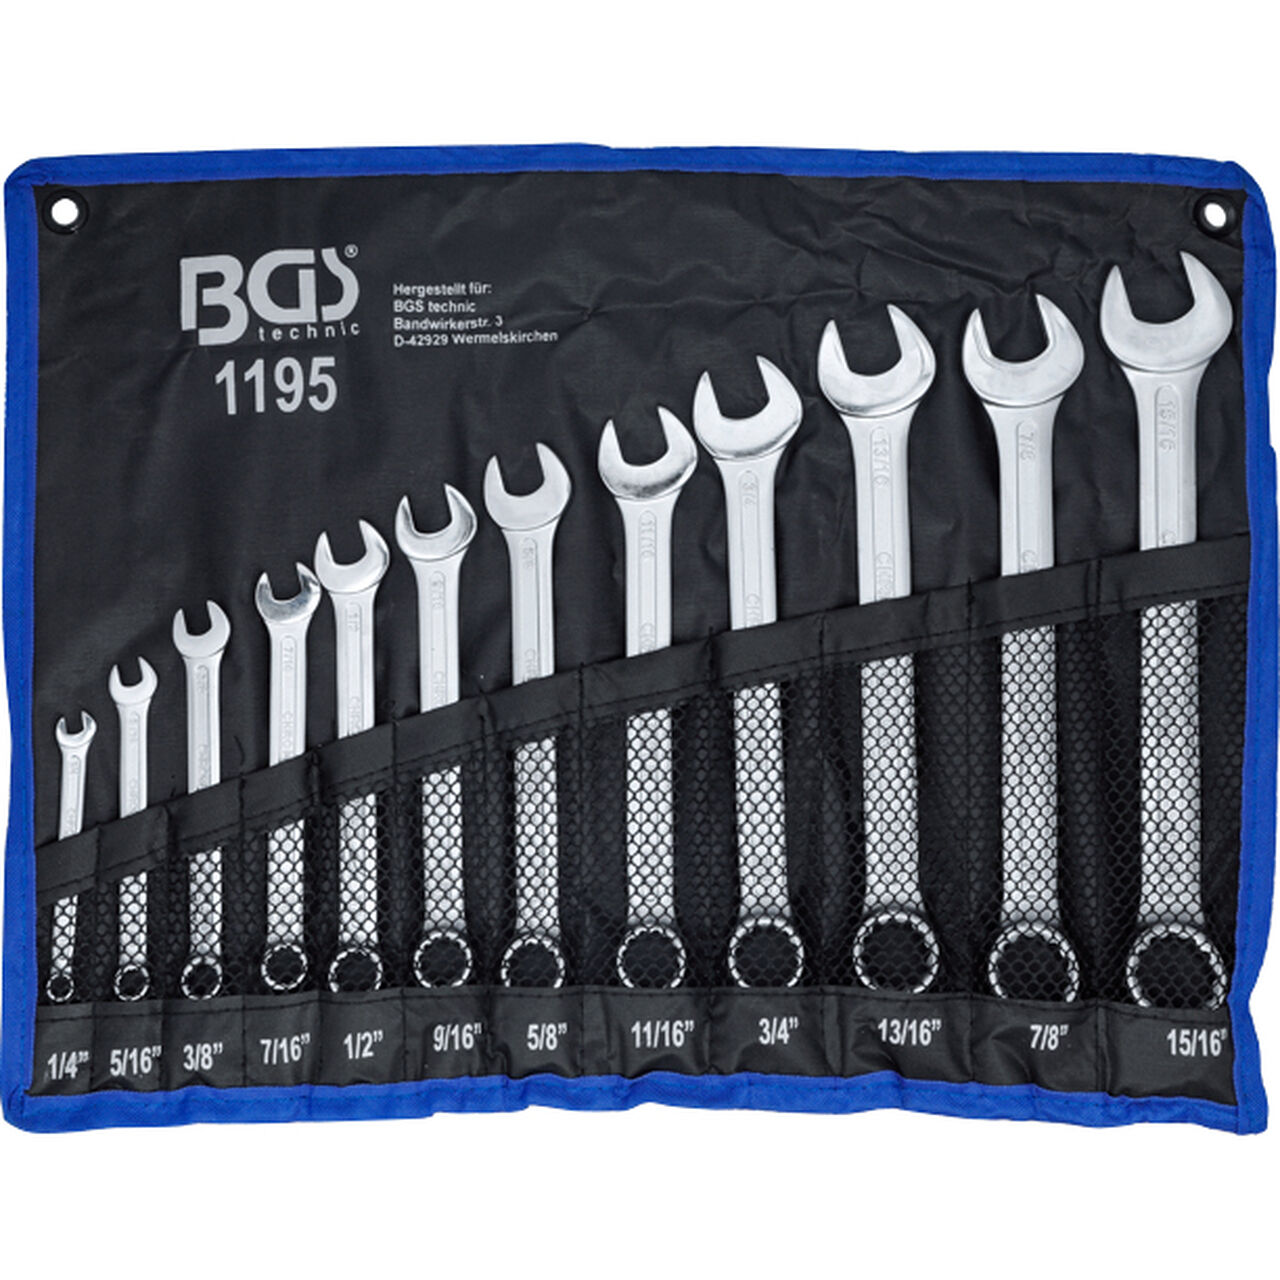 BGS Combination spanner set, inch sizes, 12 pieces to buy â POLO Motorrad